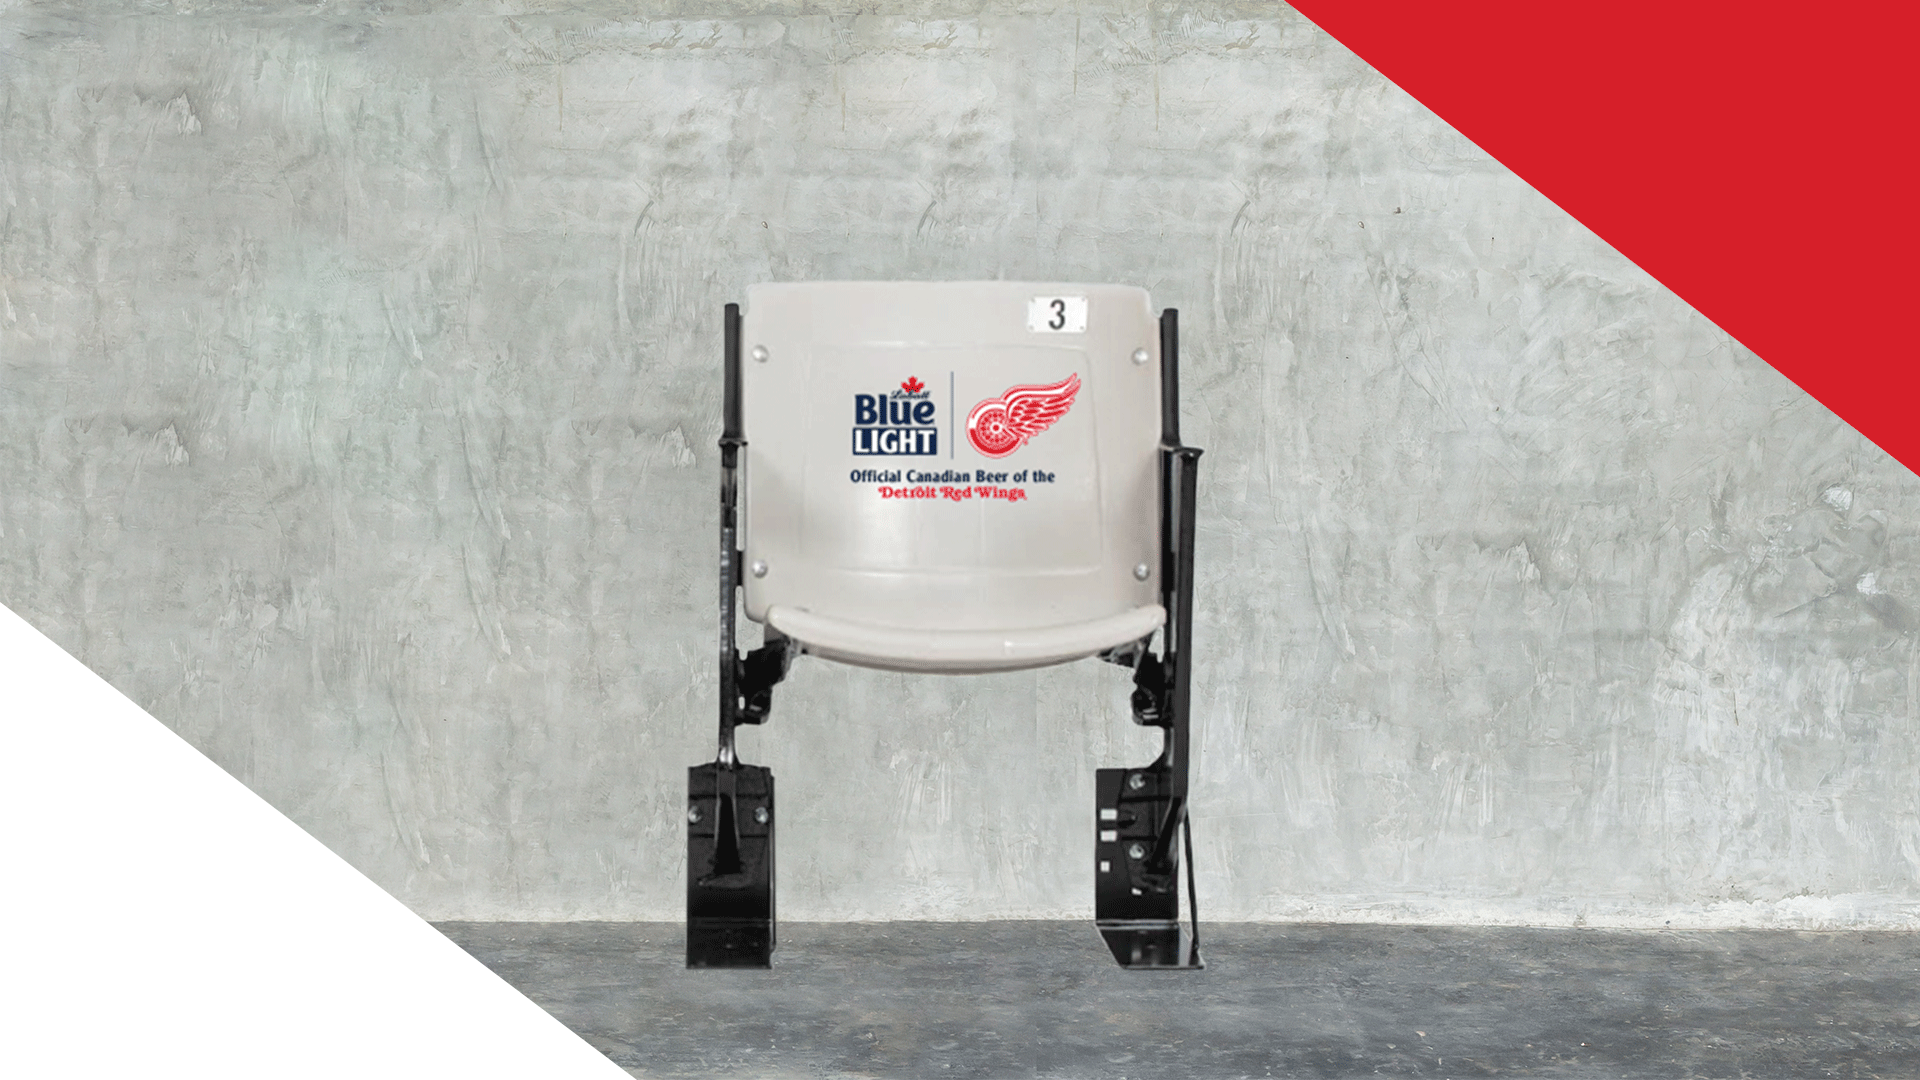 Enter for a chance to win a Labatt & Detroit Red Wings Co-Branded Stadium Seat!